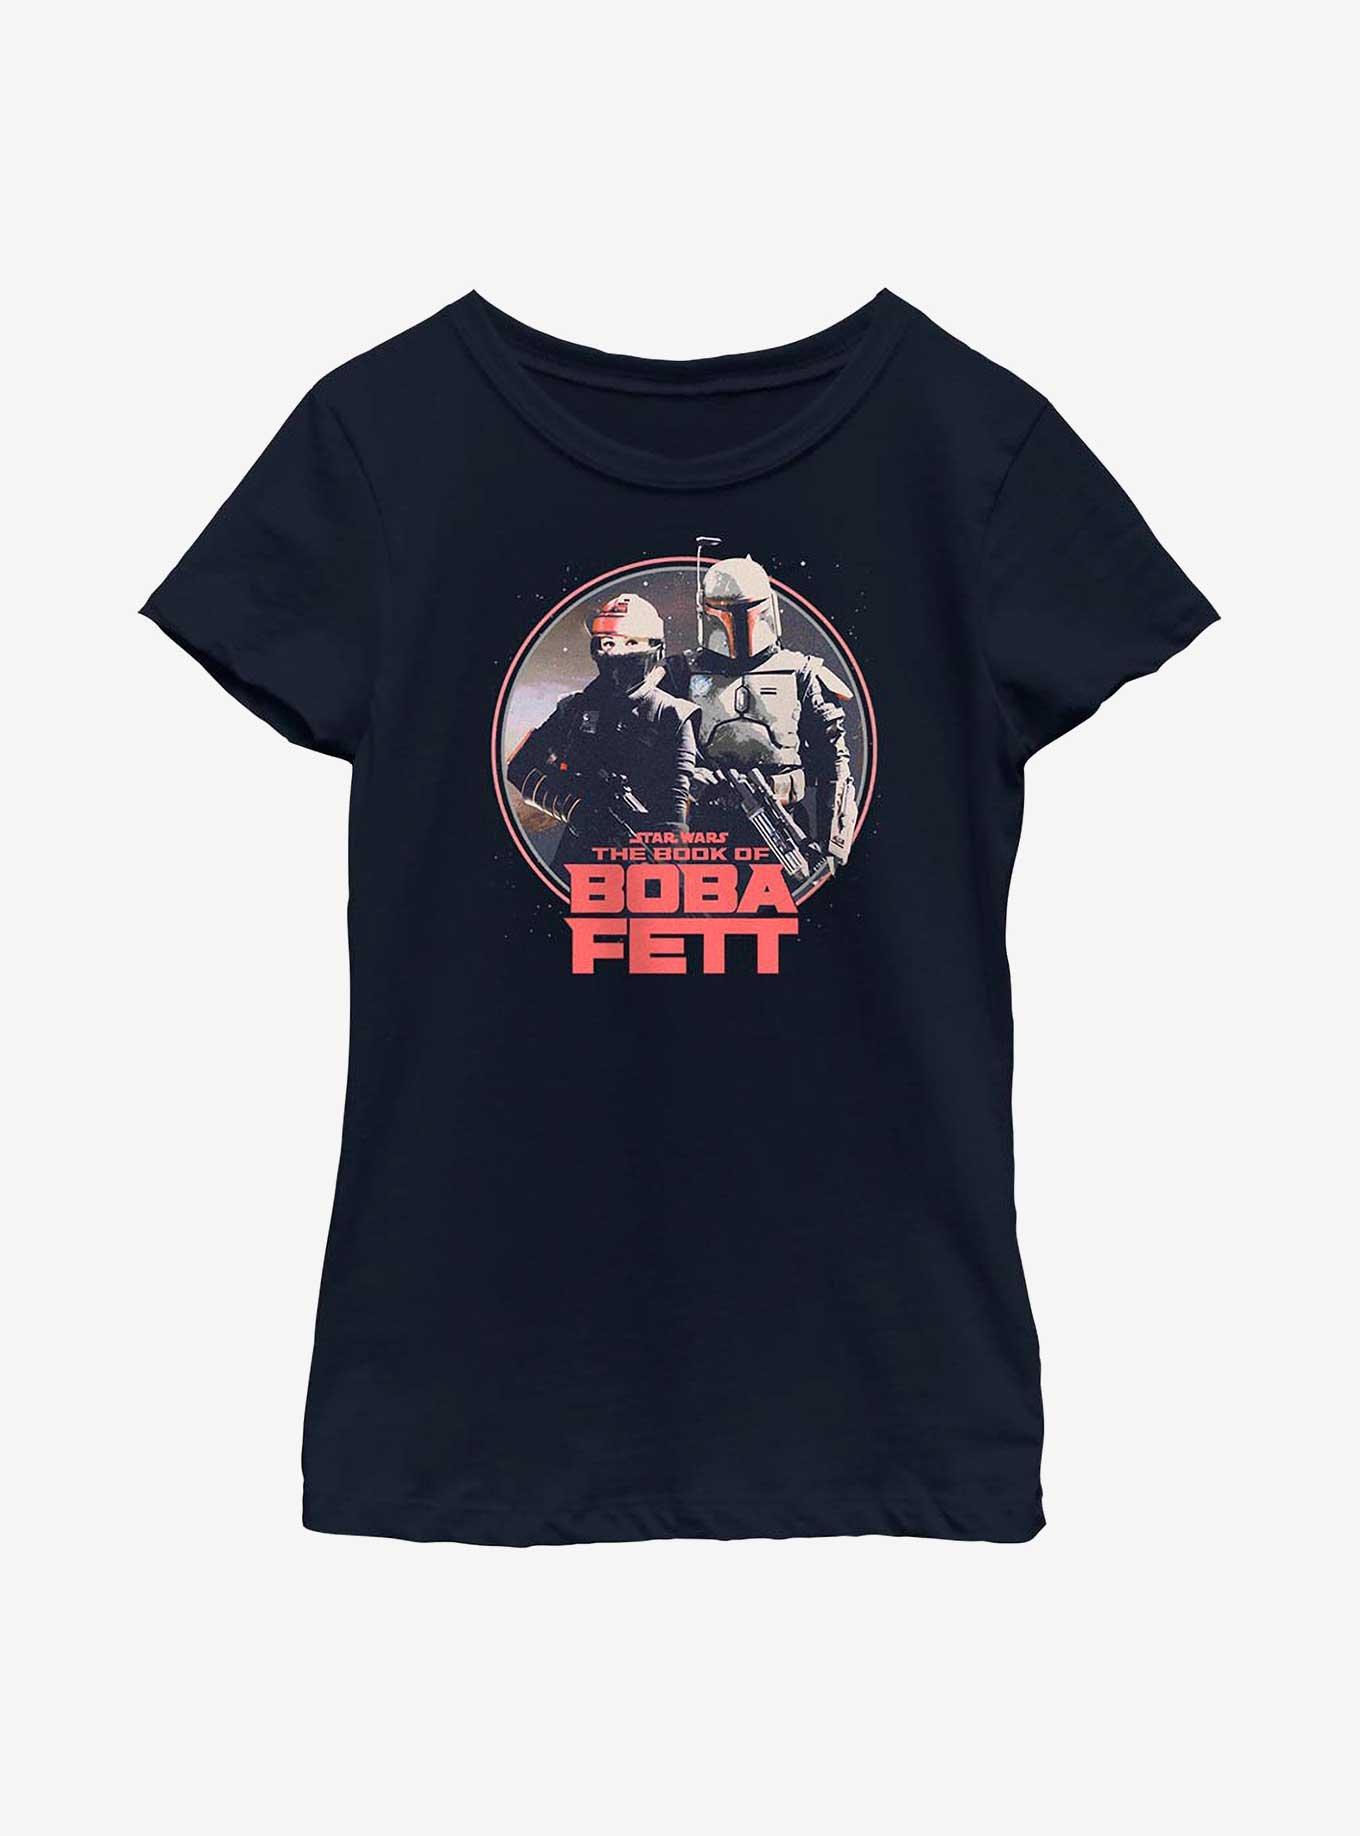 Star Wars Book Of Boba Fett Stand Your Ground Youth Girls T-Shirt, NAVY, hi-res